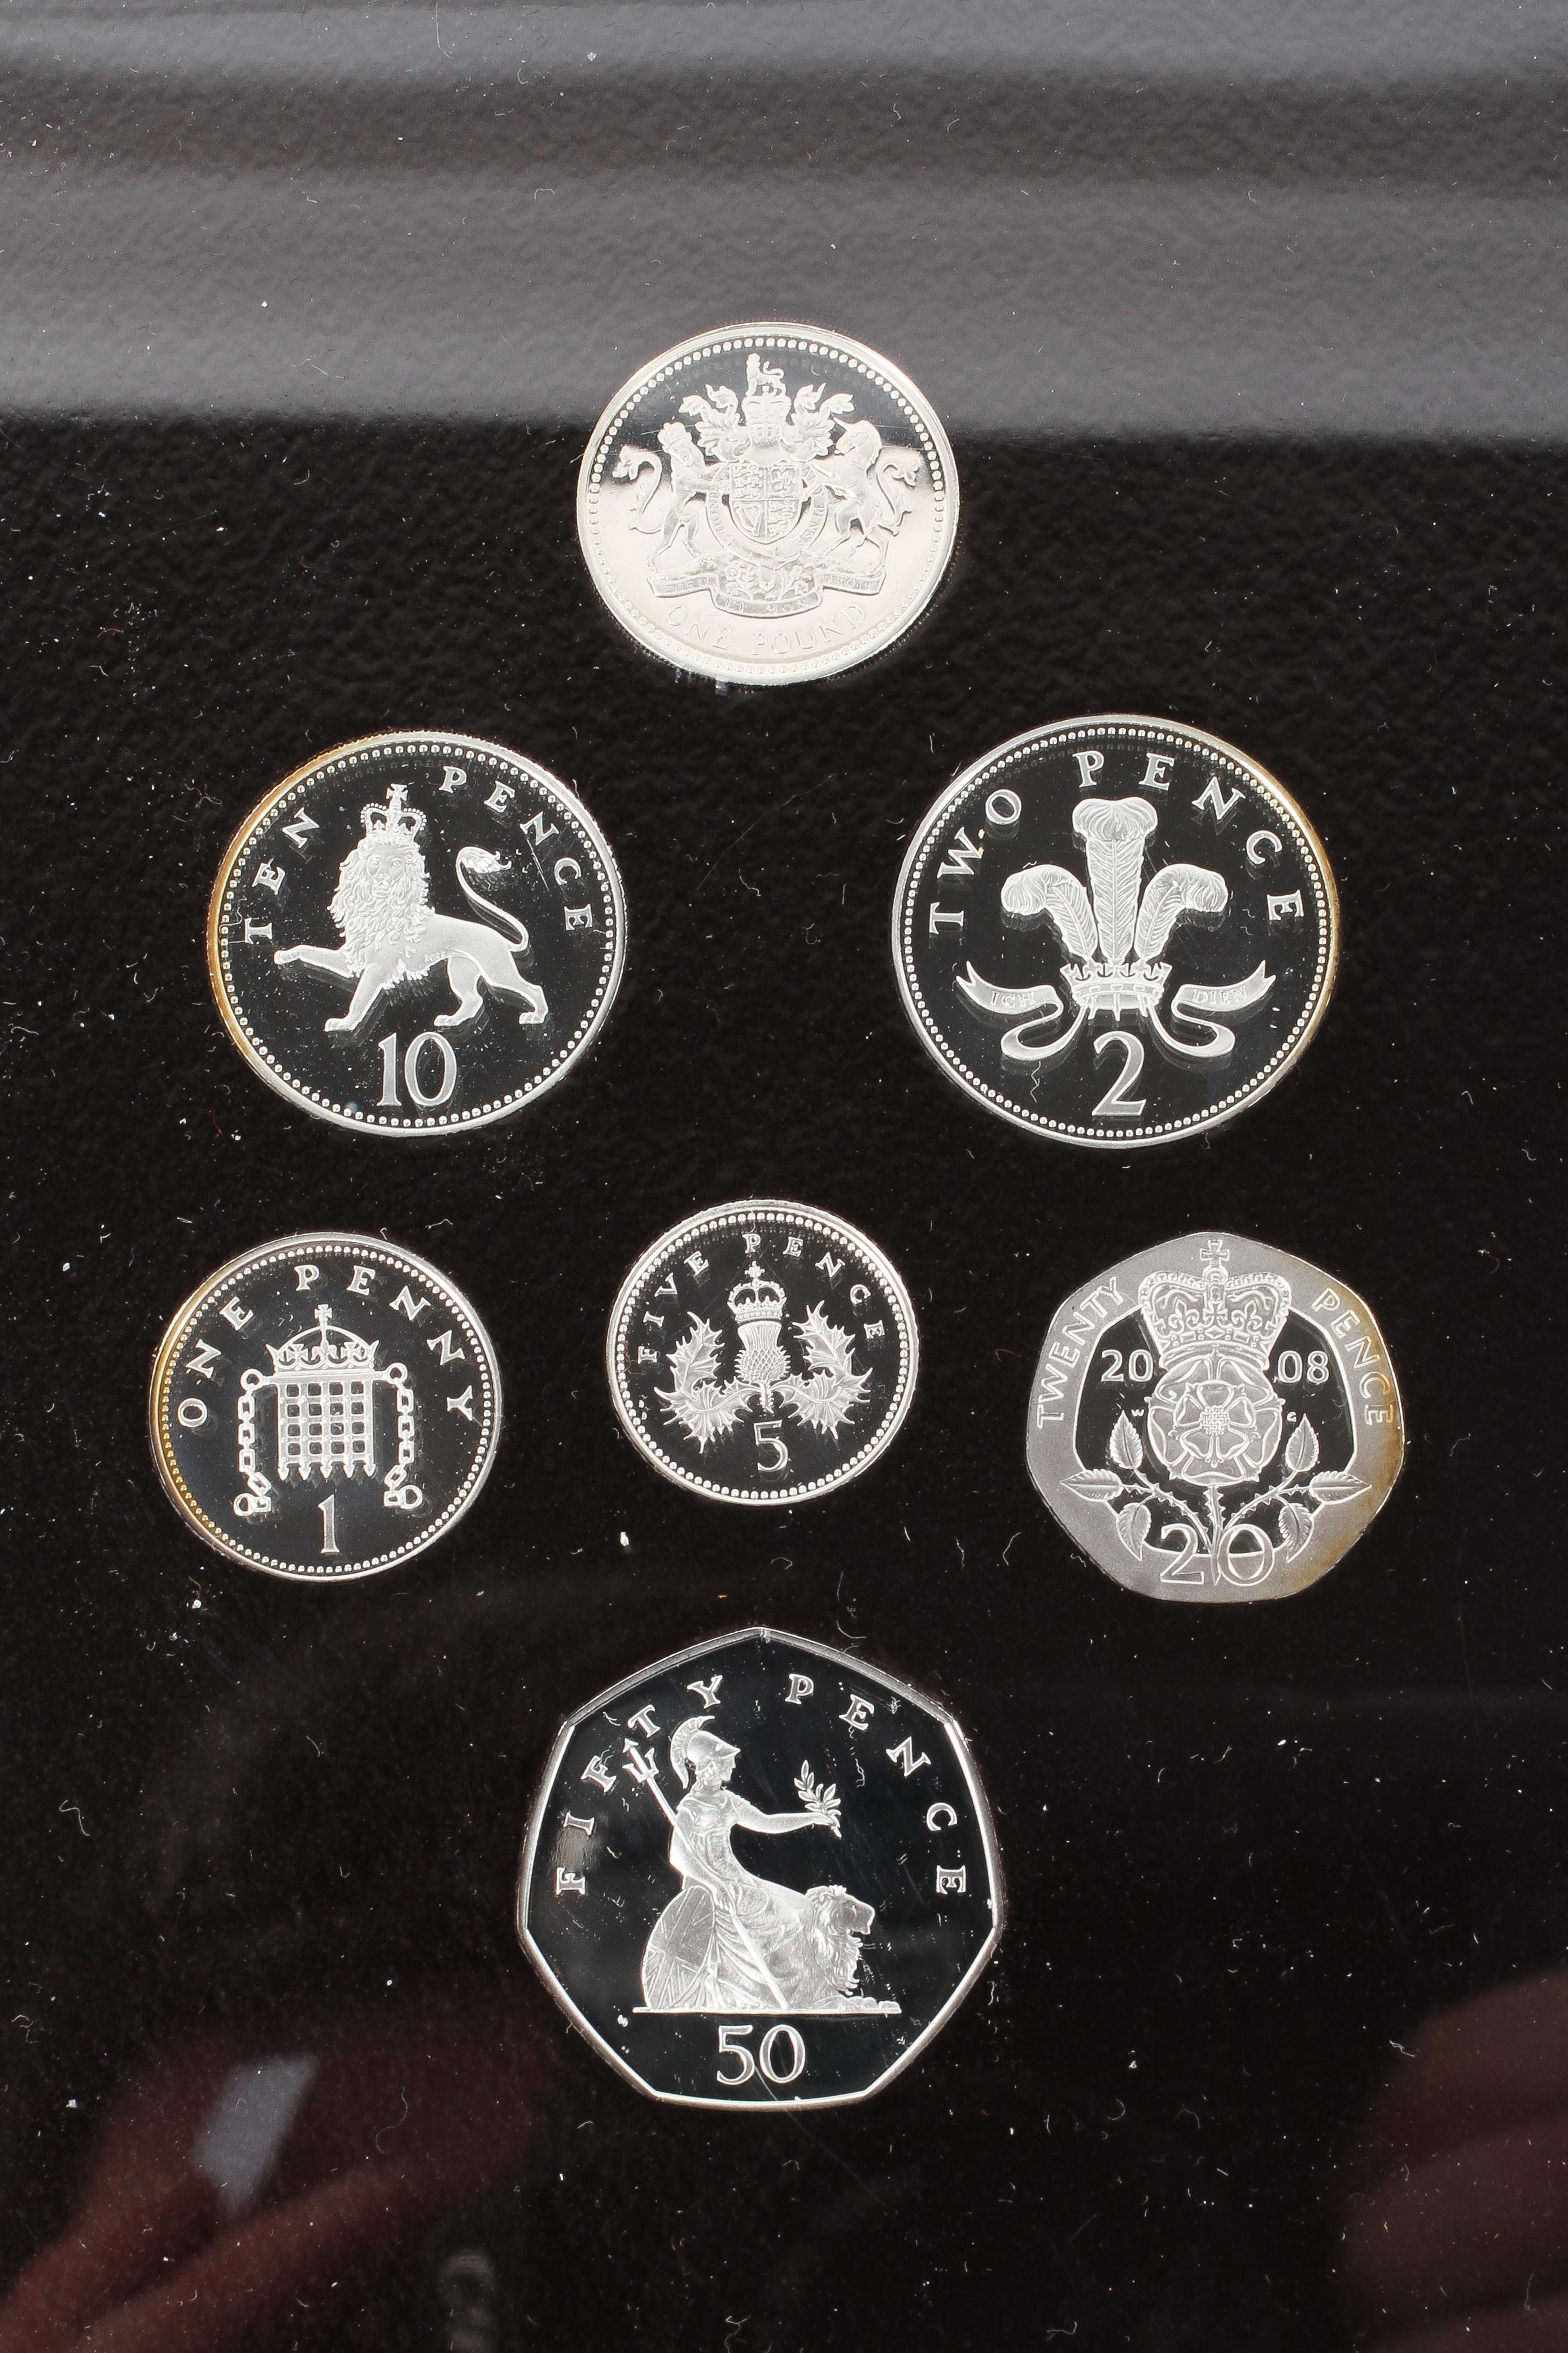 A 2008 silver proof collection of Emblems of Britain with seven coins, boxed. - Image 2 of 2